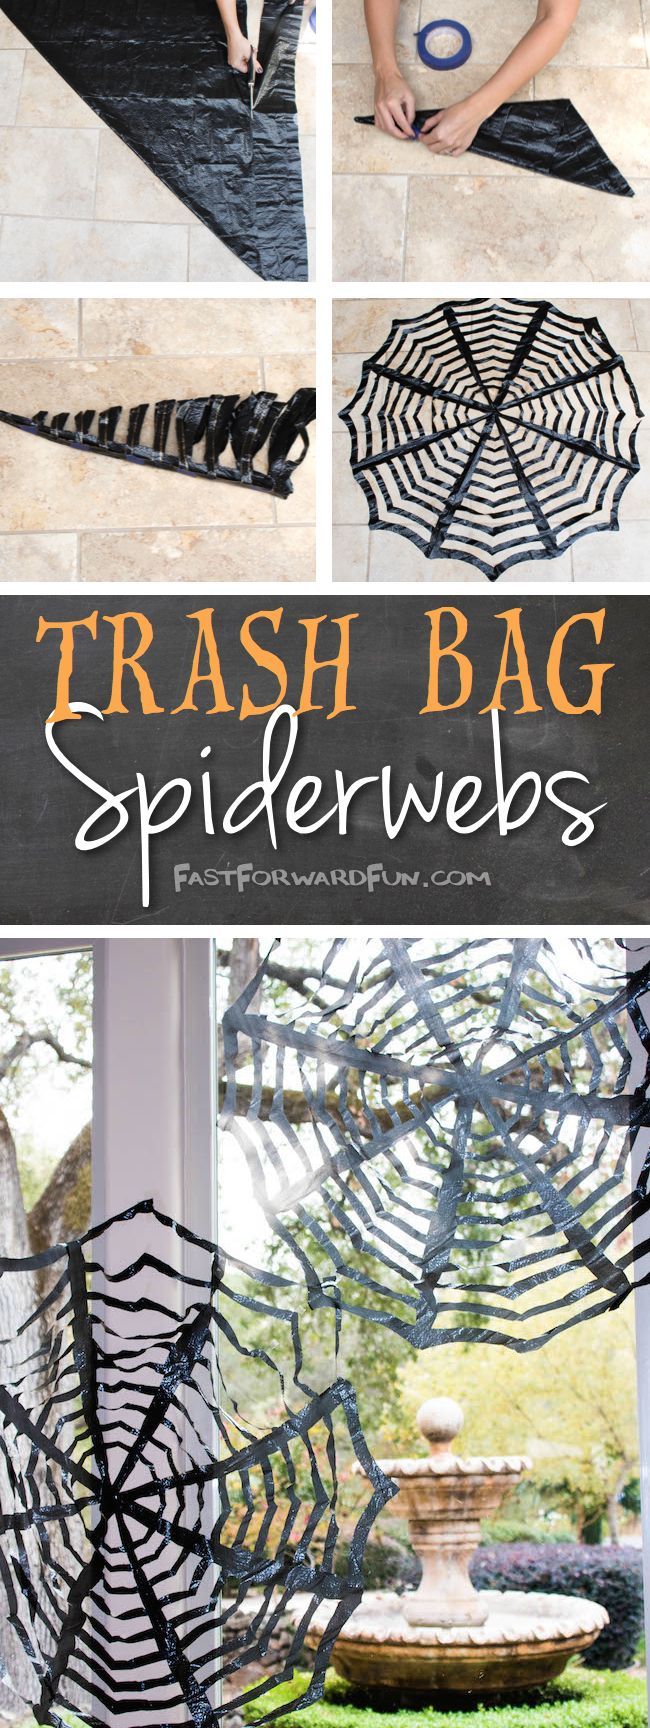 Easy DIY Trashbag Spiderweb Tutorial — Fun video and lots of step-by-step photos! Perfect for Halloween.